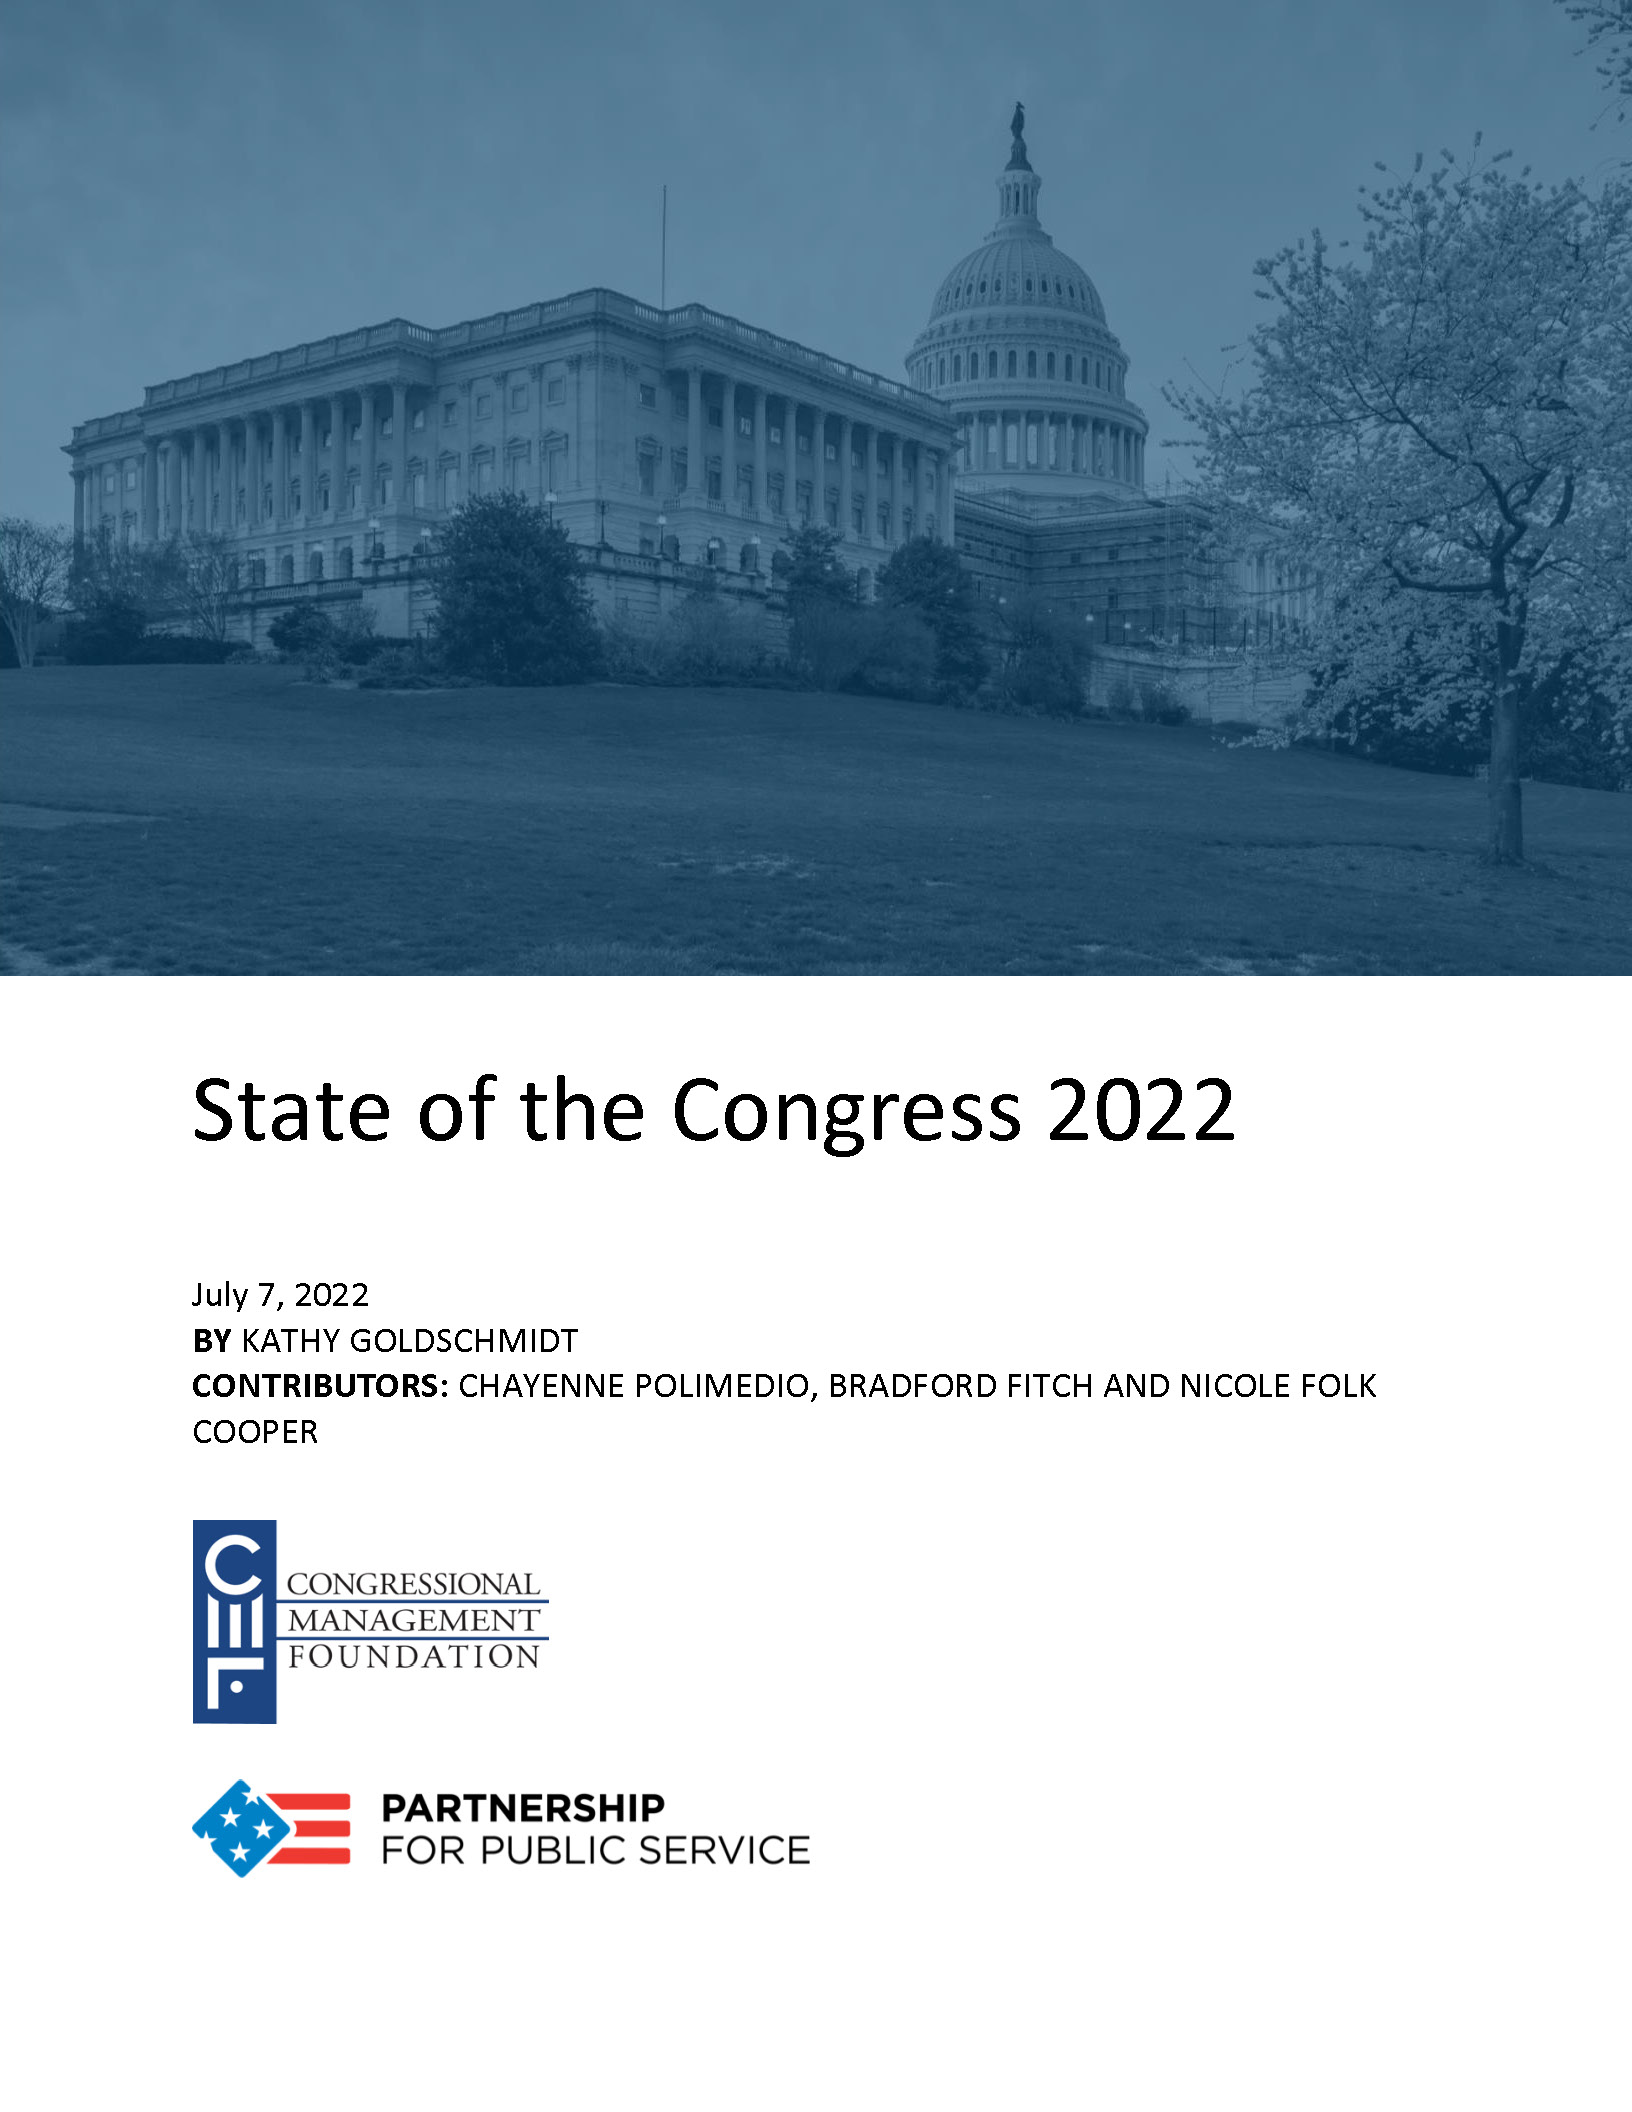 cover of the state of the congress 2022 report